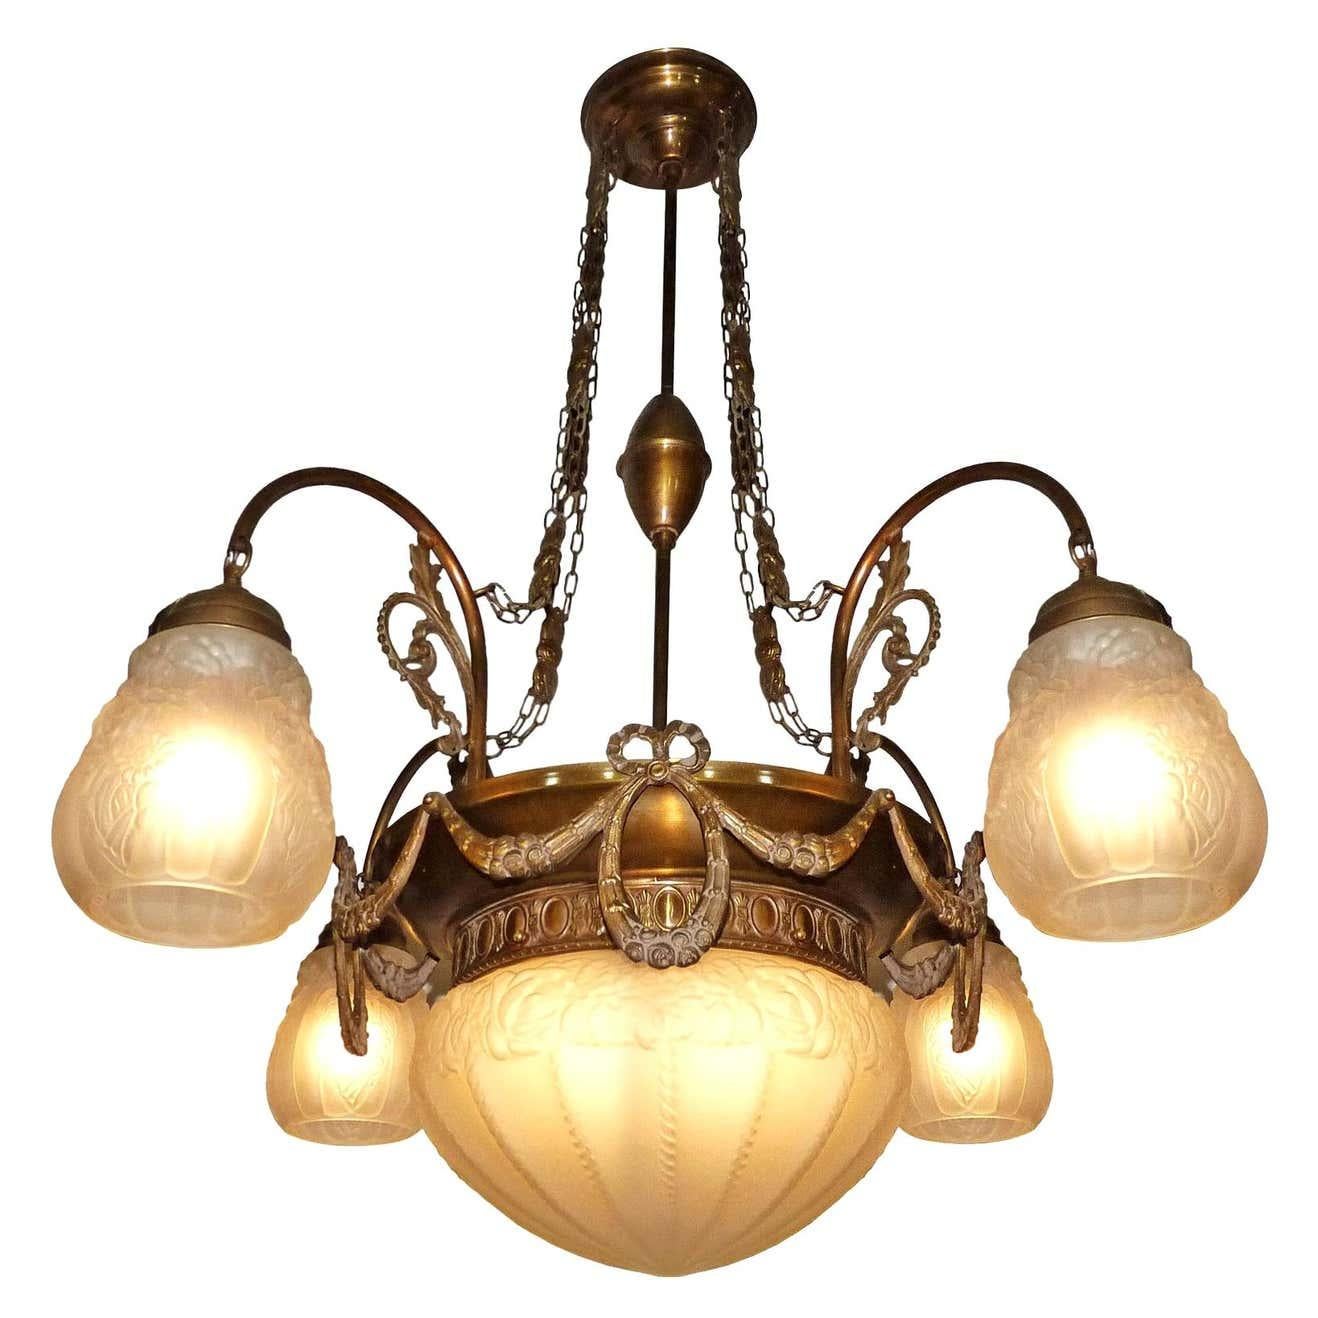 Gorgeous French Art Deco and Art Nouveau in frosted glass, 5-light chandelier/ brass with garlands. 
Age patina
Five light bulbs (four bulbs E14 40W and one bulb E27 60W)
Rewired/ Good working condition
Measures: Diameter 30 in / 75 cm
Height